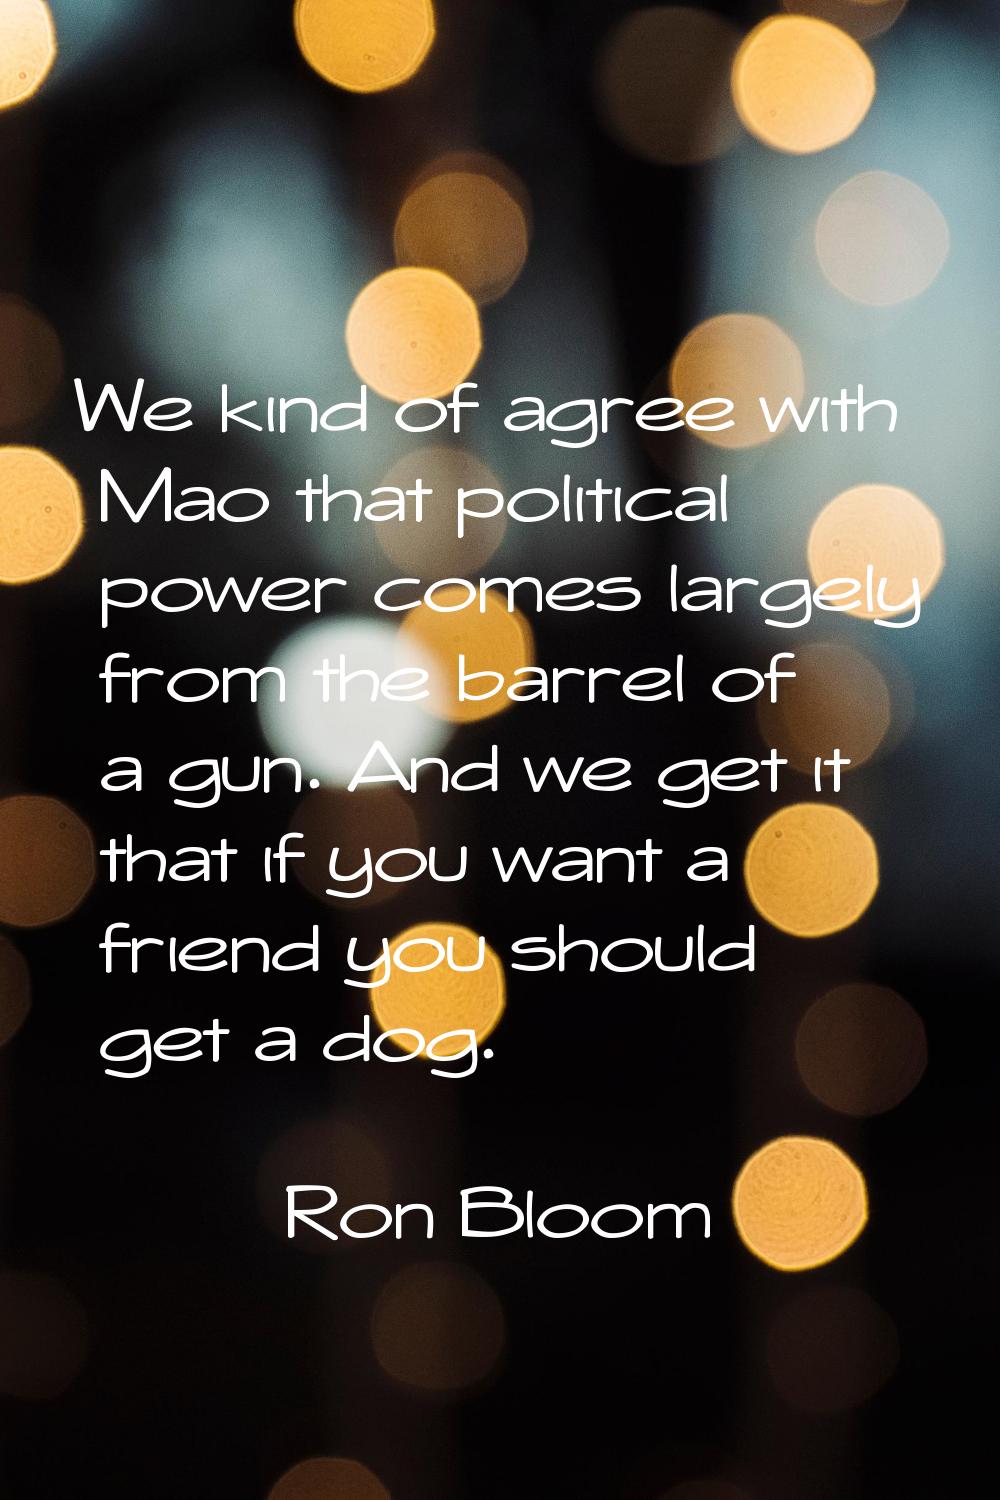 We kind of agree with Mao that political power comes largely from the barrel of a gun. And we get i